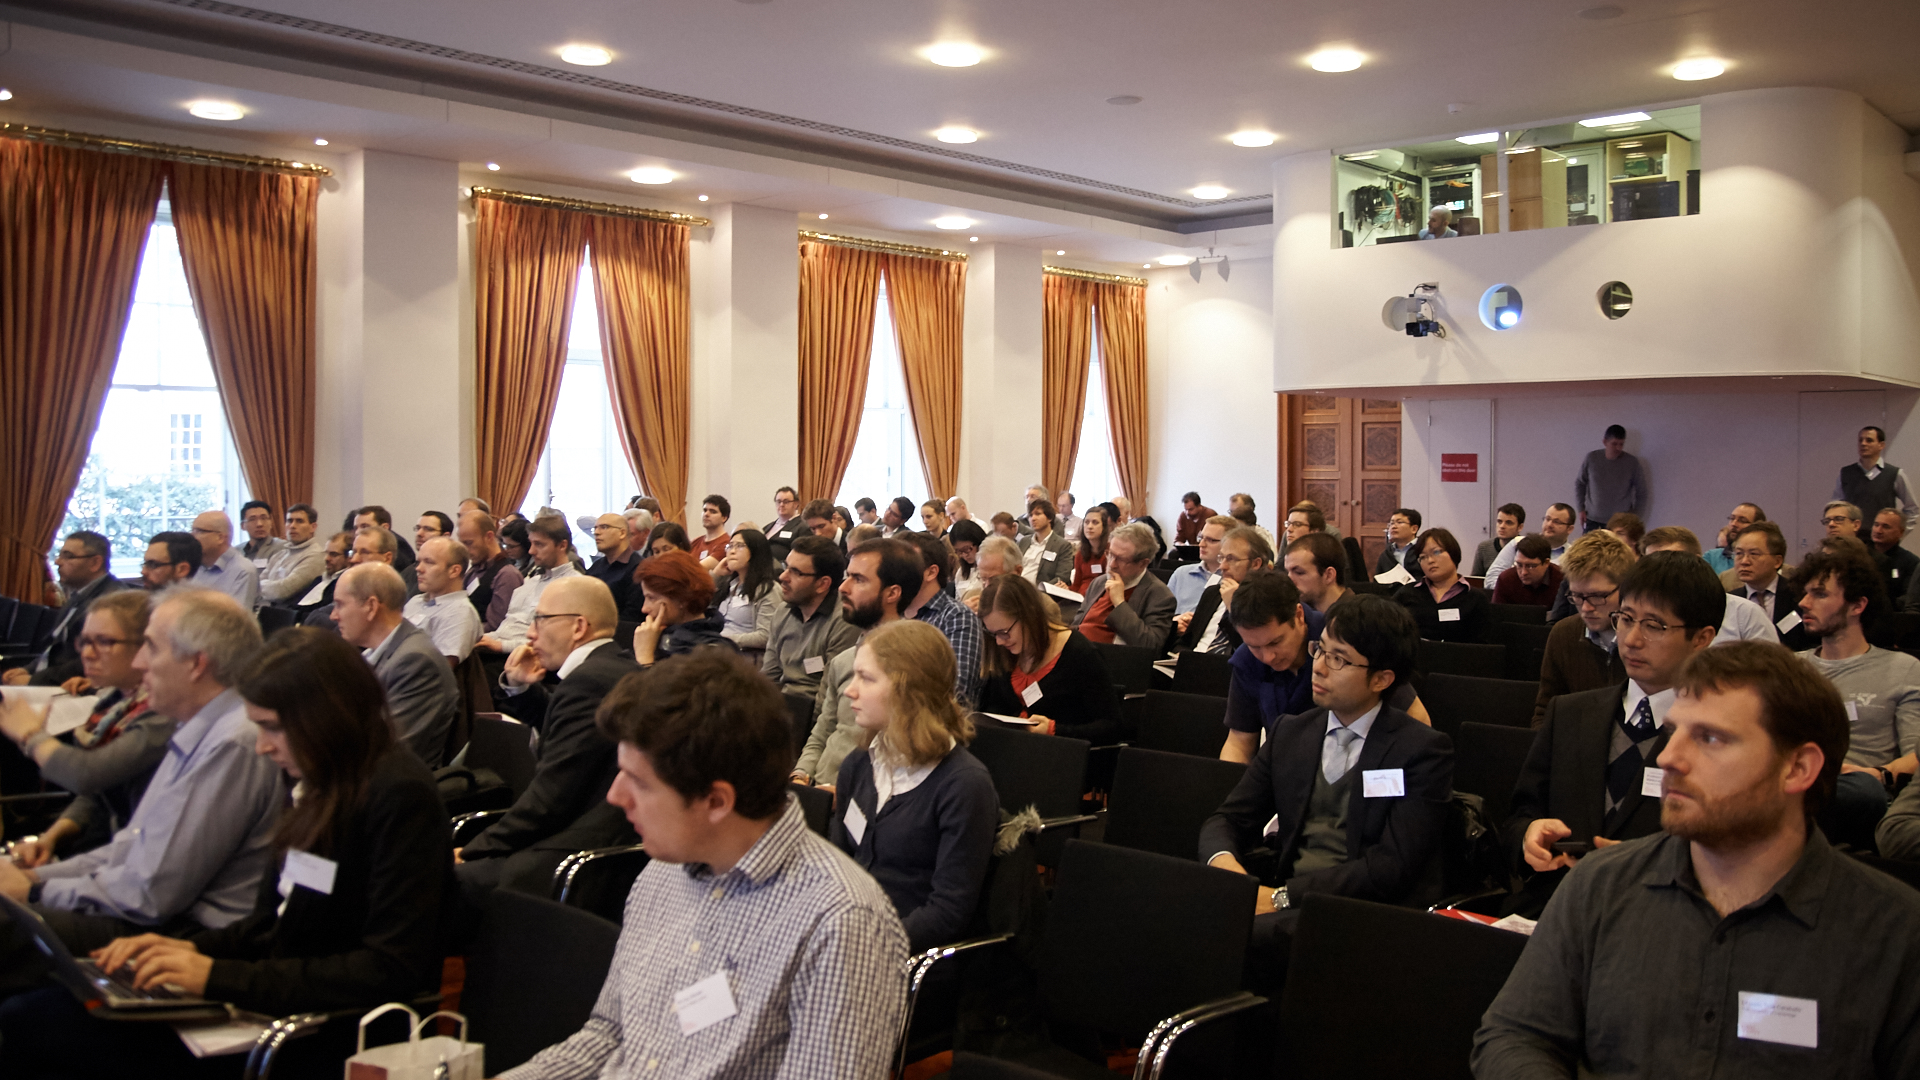 Attendees at the Royal Society Discussion meeting ‘The challenges of hydrogen and metals’, Jan 2017